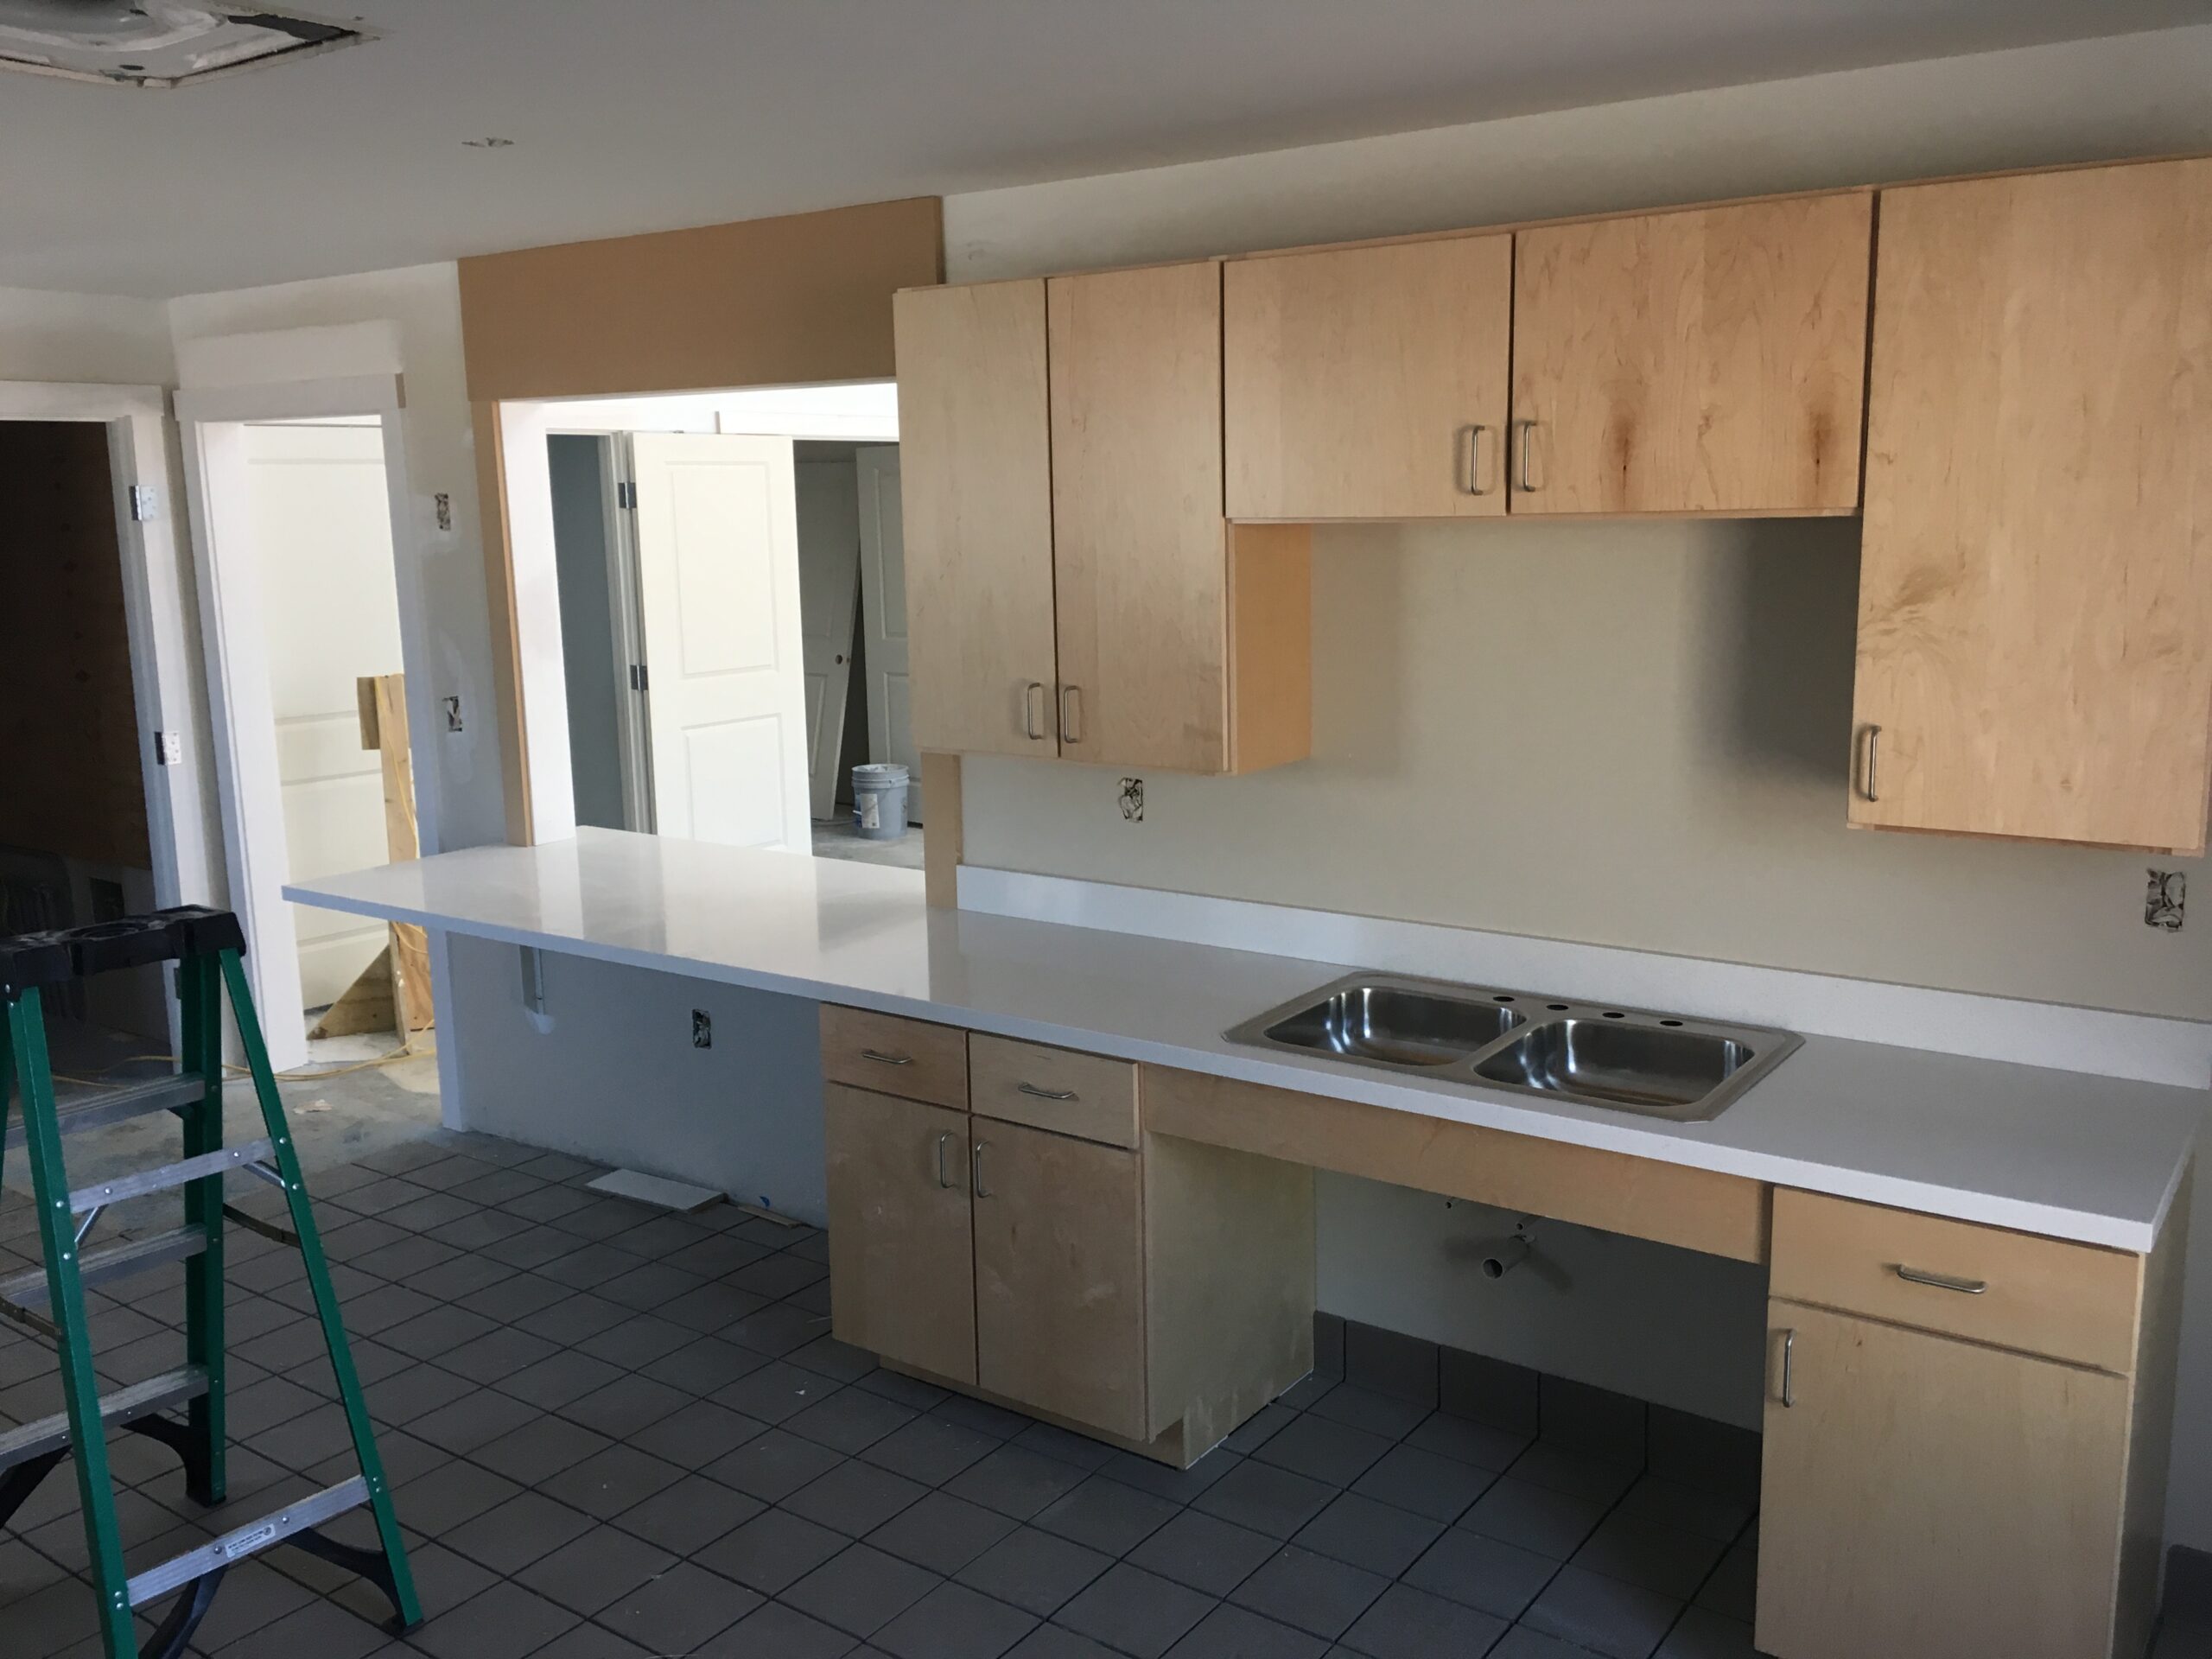 Community building kitchen during construction